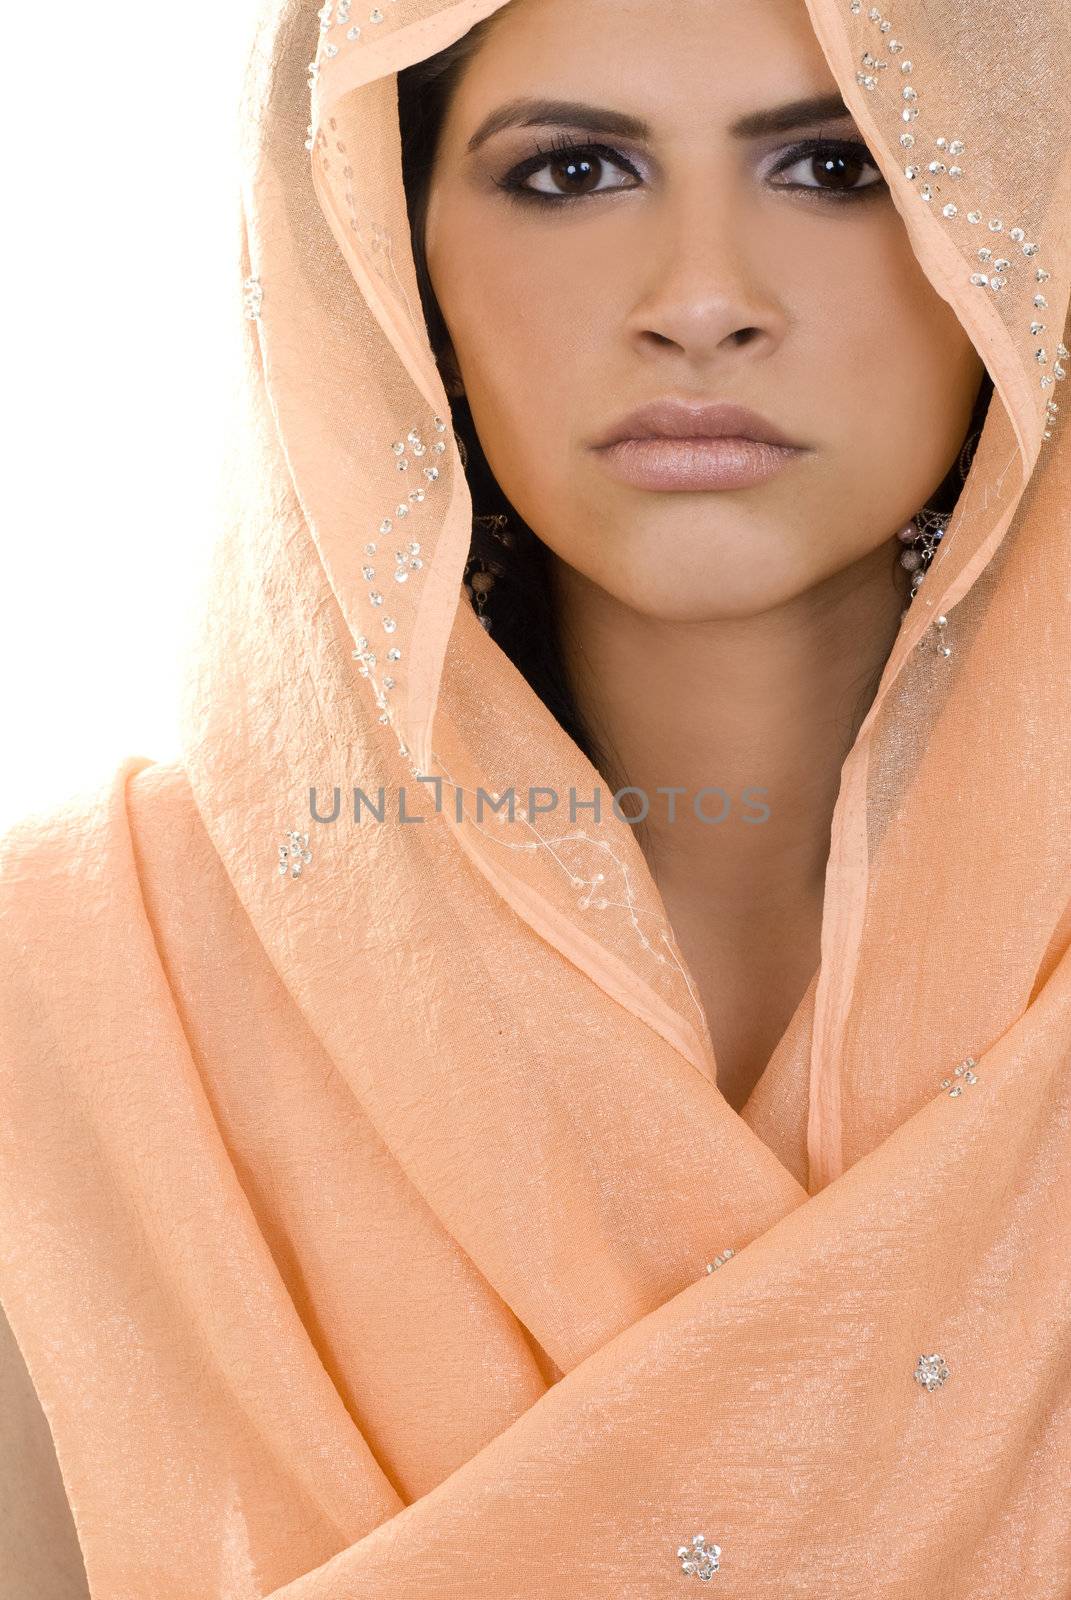 A young ethnic woman in a sari.